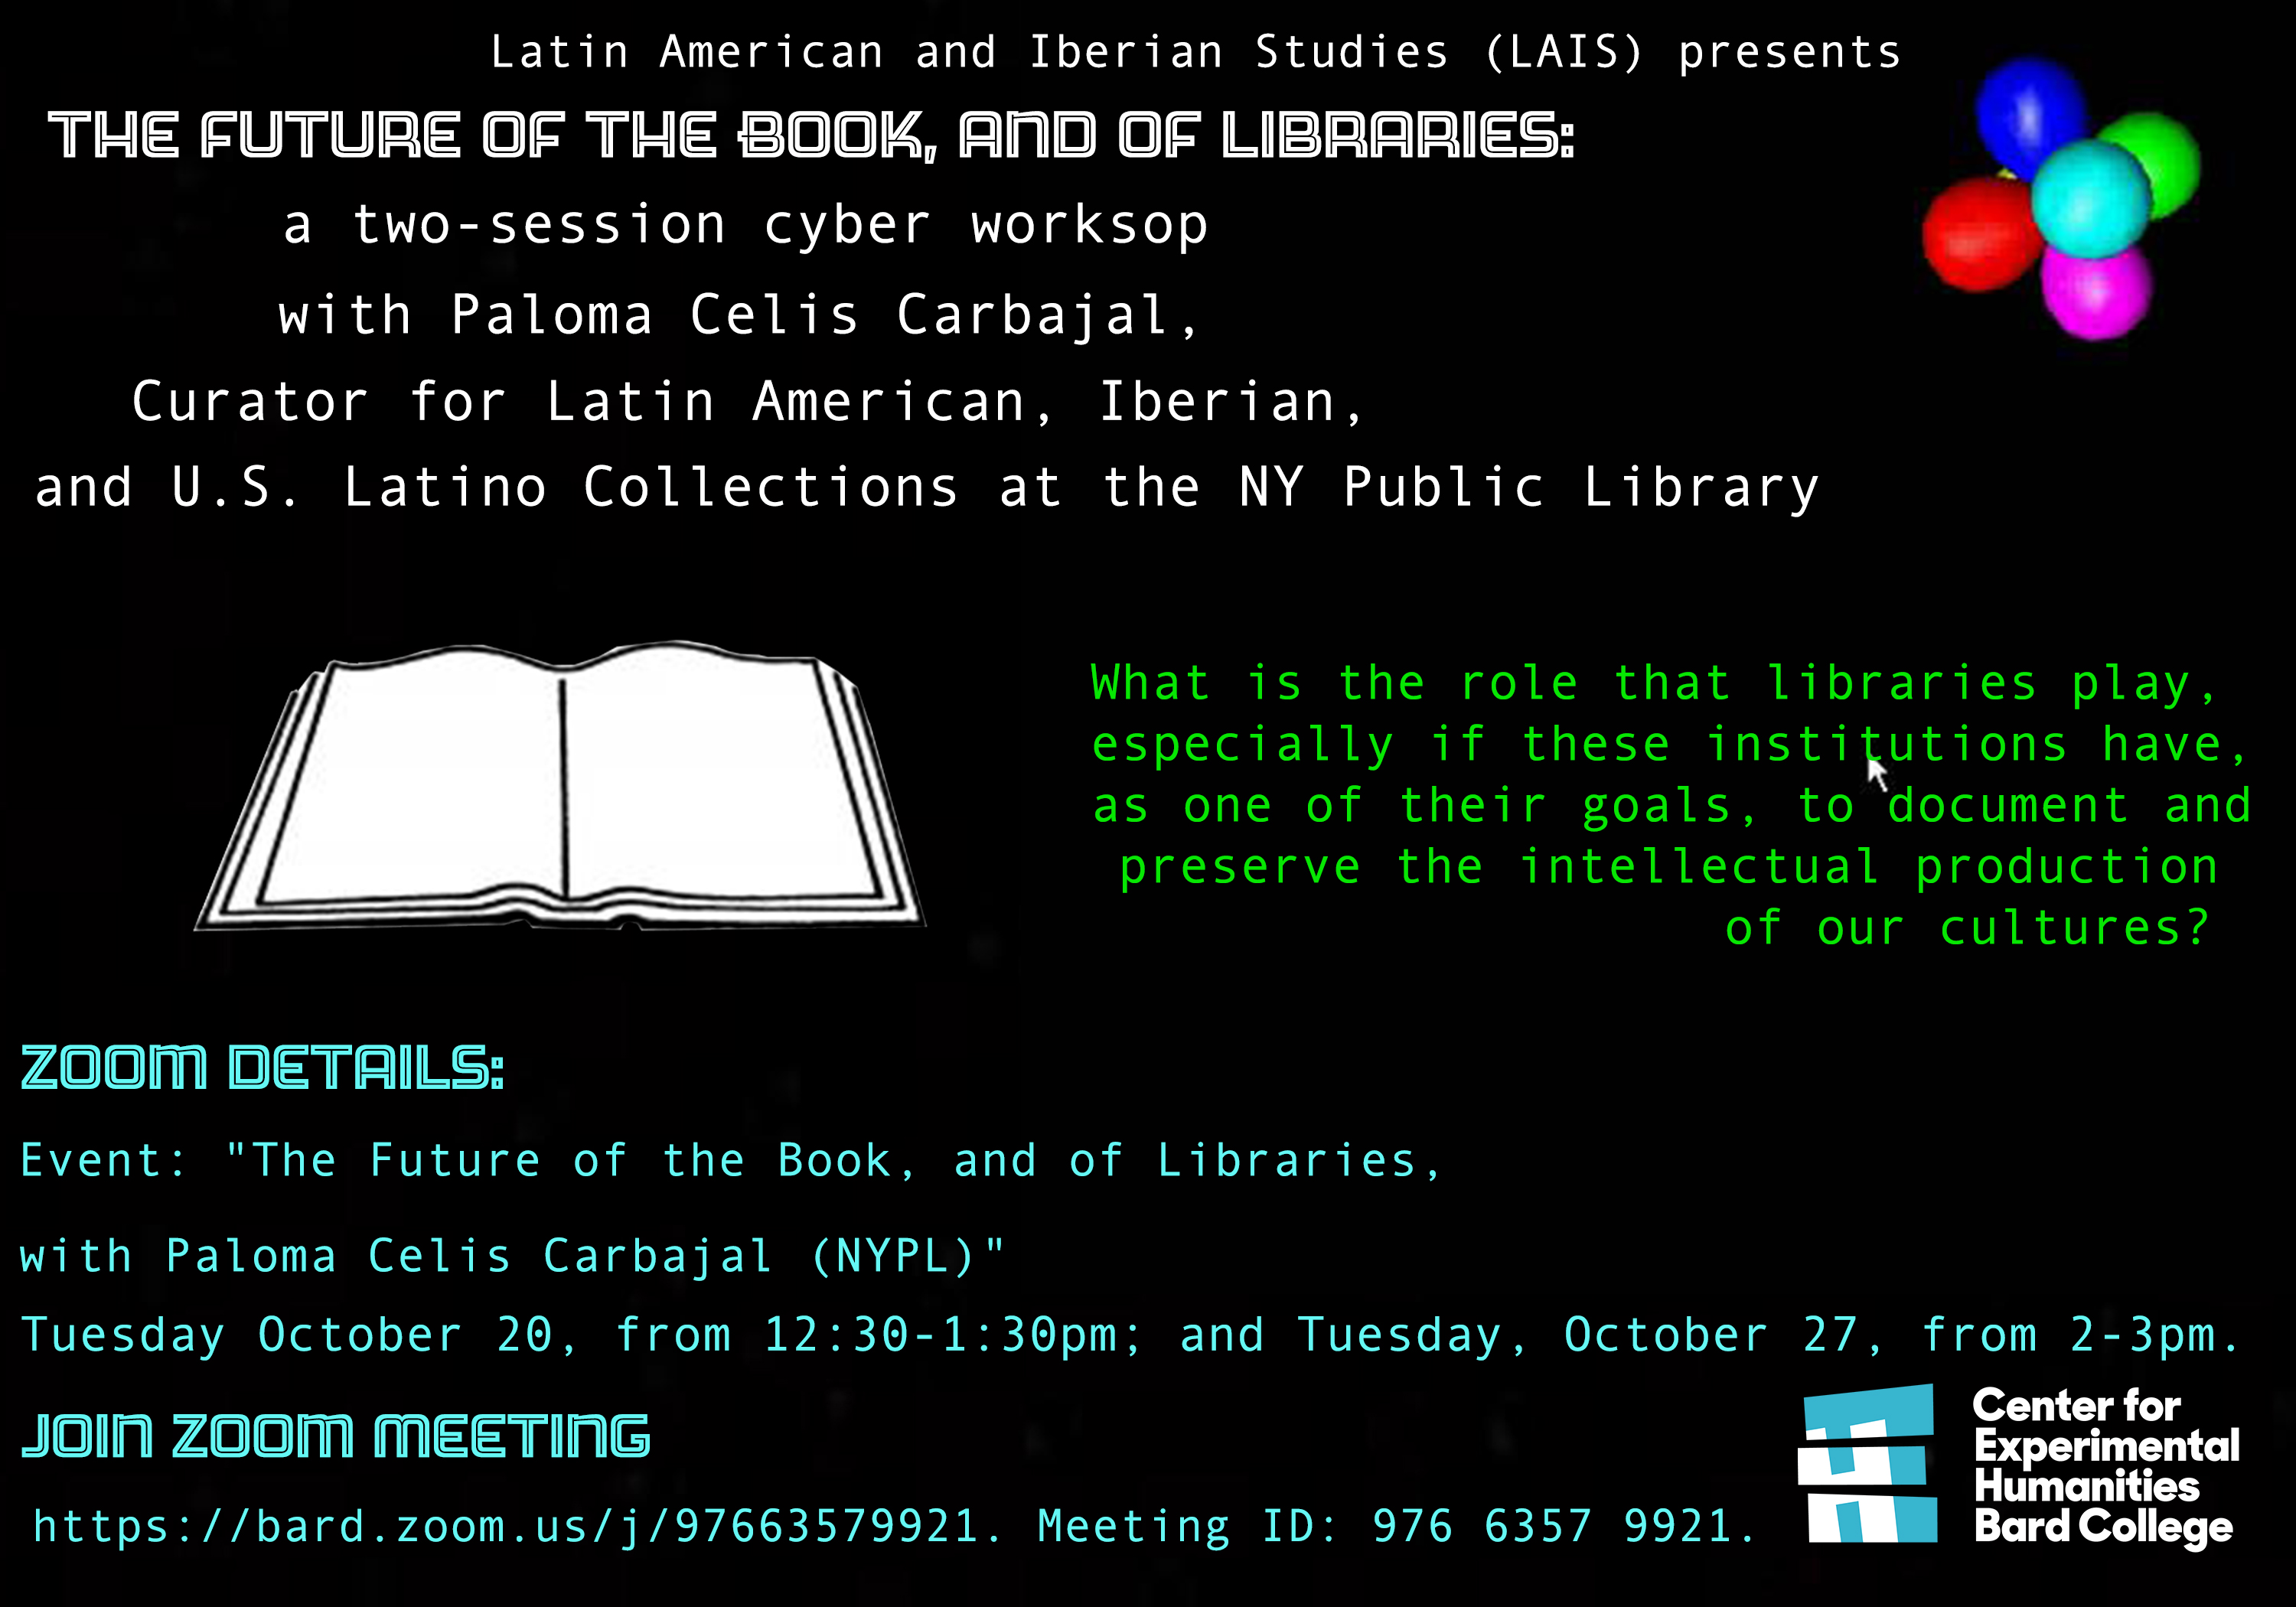 [The Future of the Book, and of Libraries] 